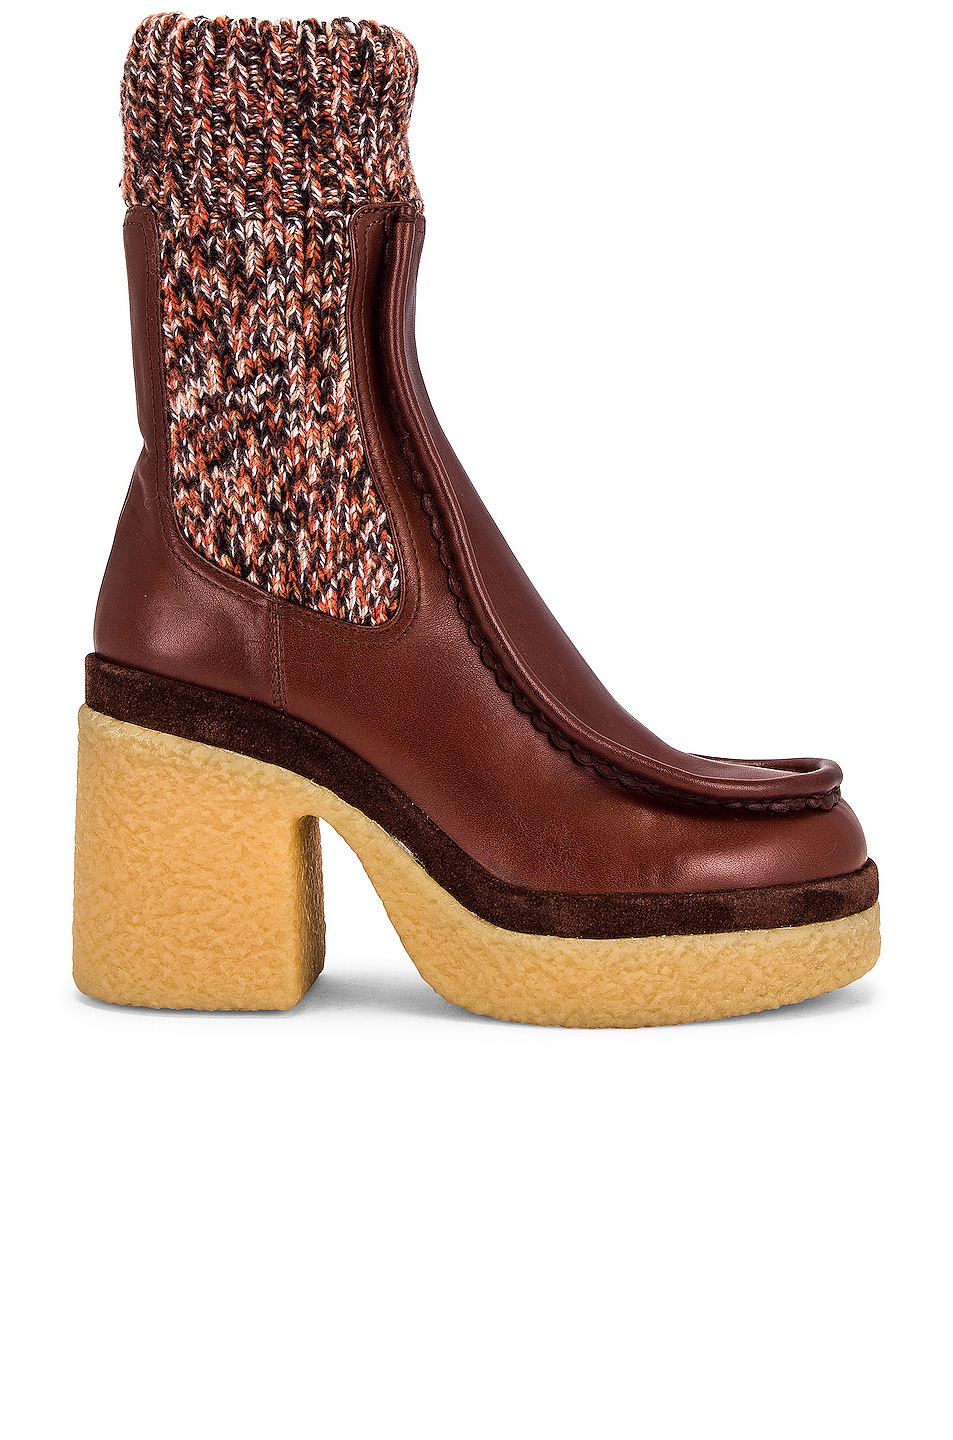 Image 1 of Chloe Jamie Ankle Boots in Tannish Brown